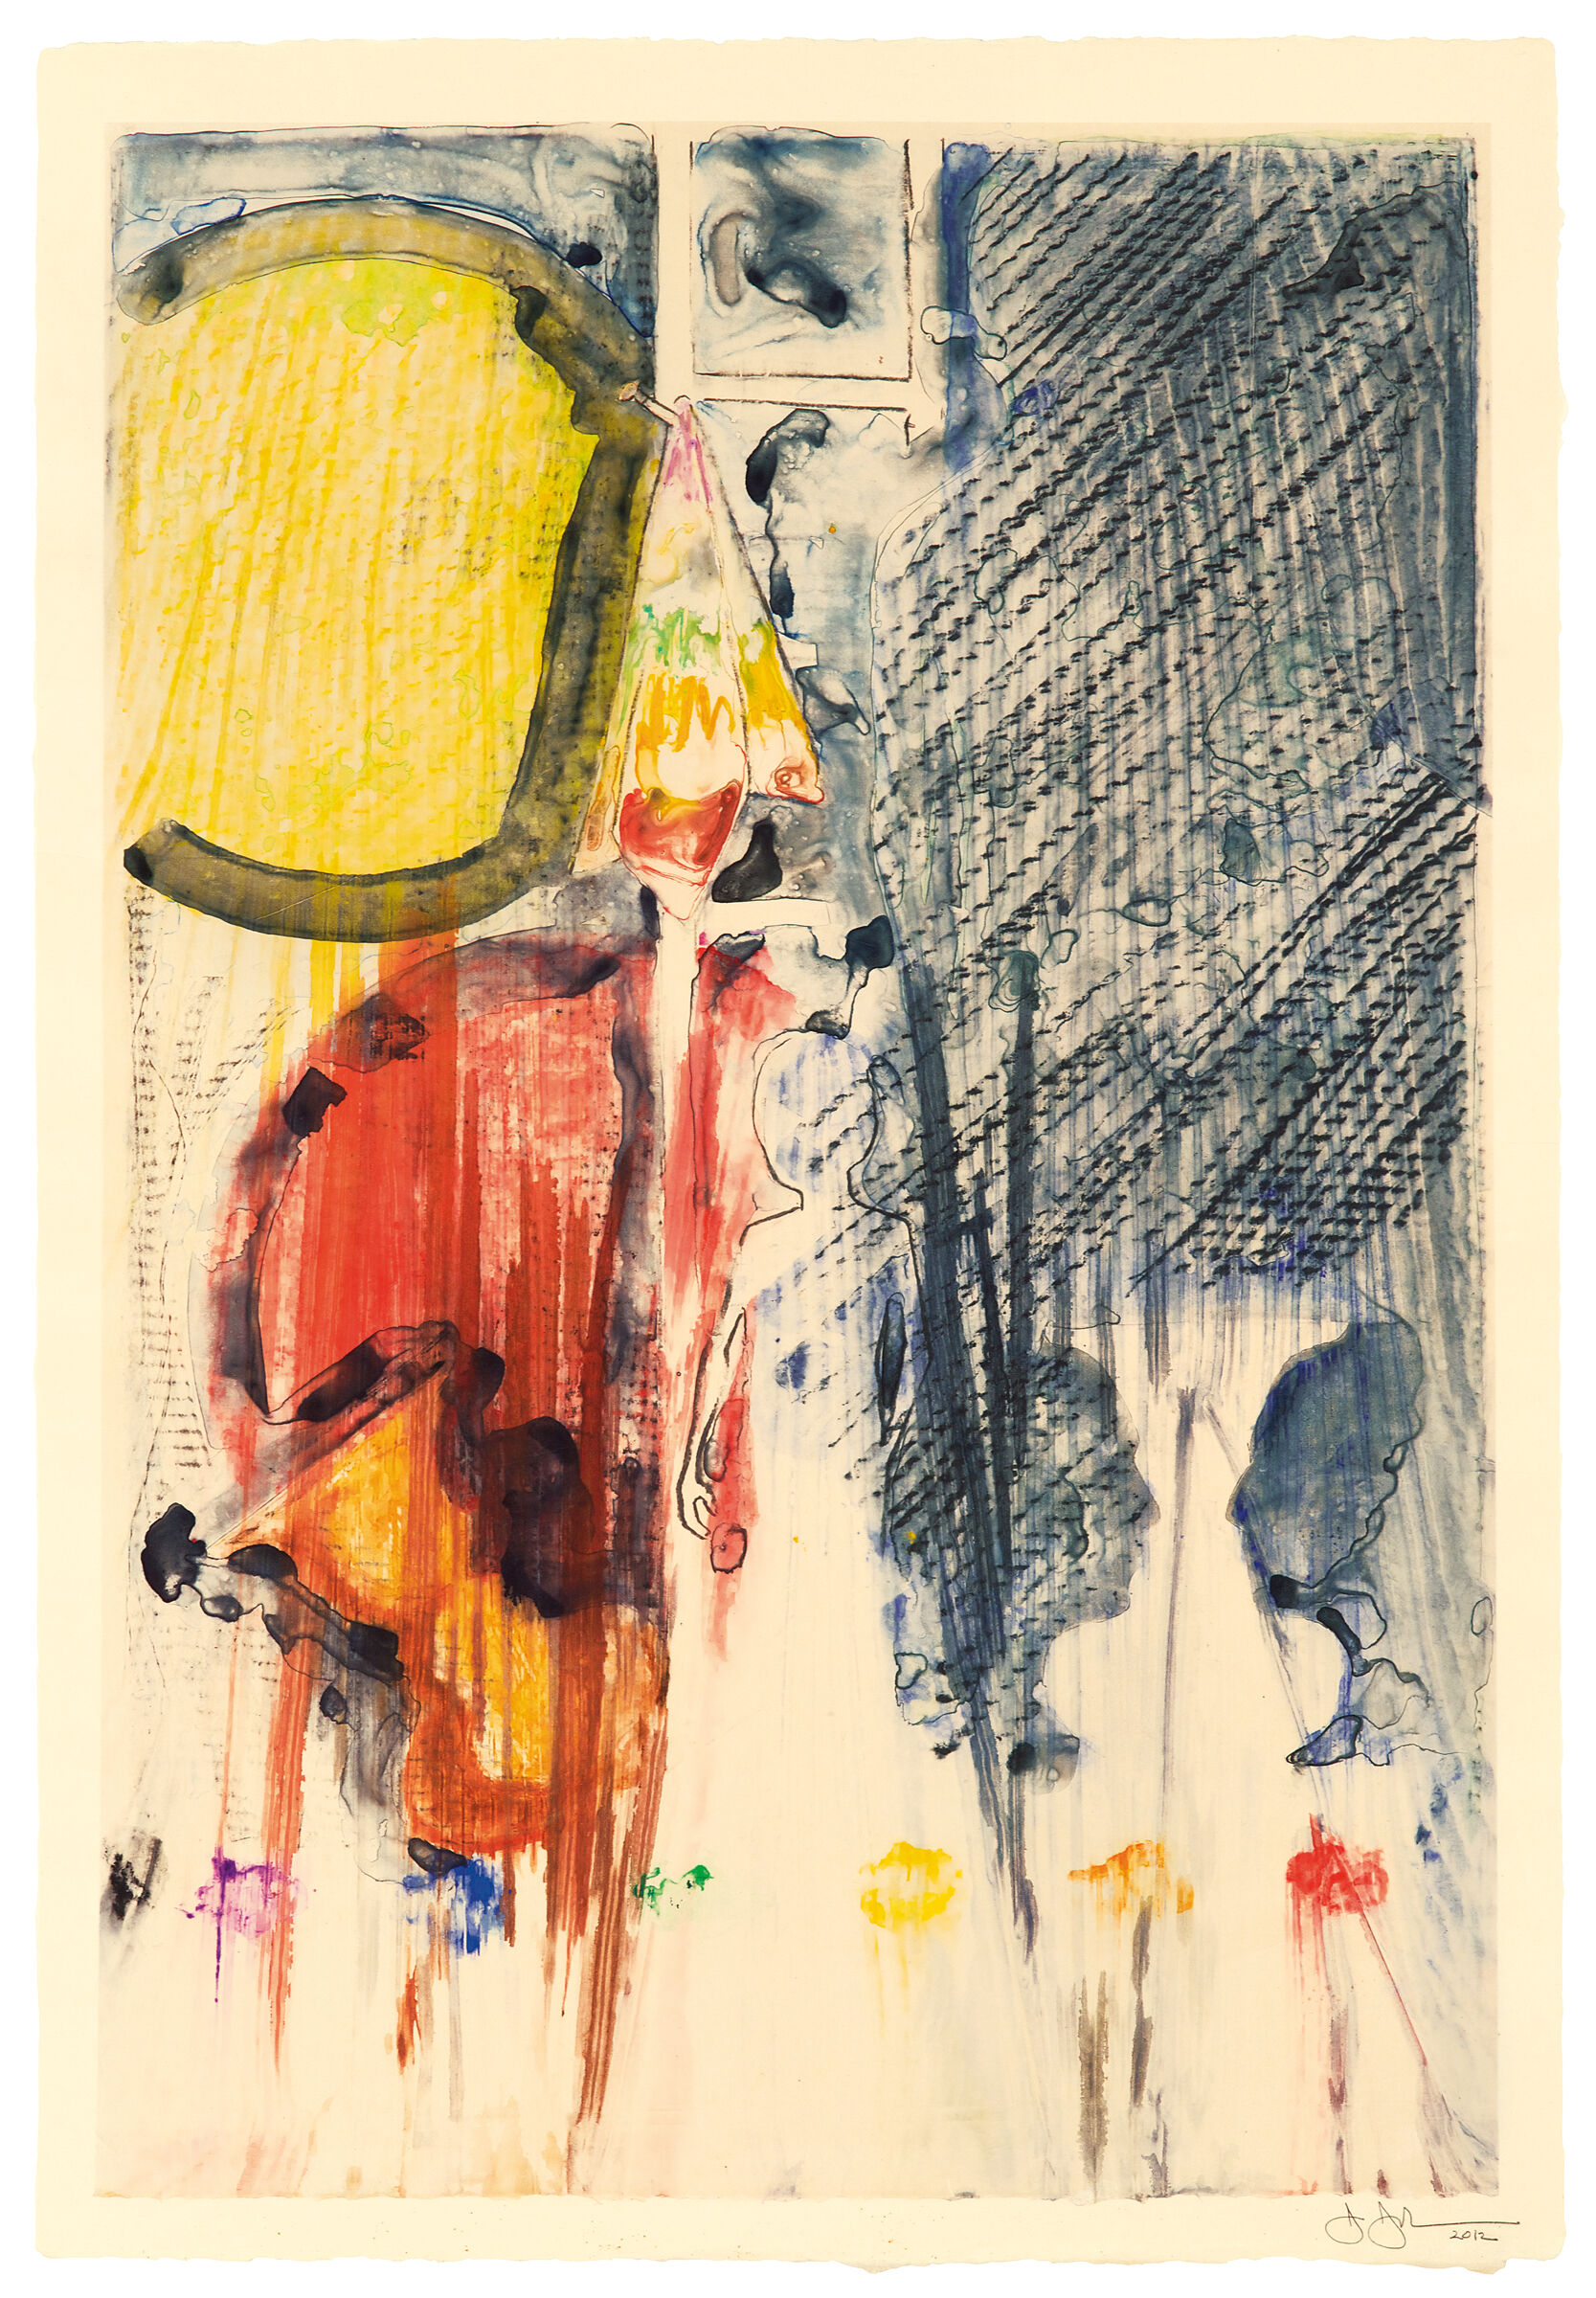 Abstract composition of blue, yellow, and red on cream-colored paper, with subtle images like human silhouettes and a pinned piece of fabric embedded into the fields of color and pattern.